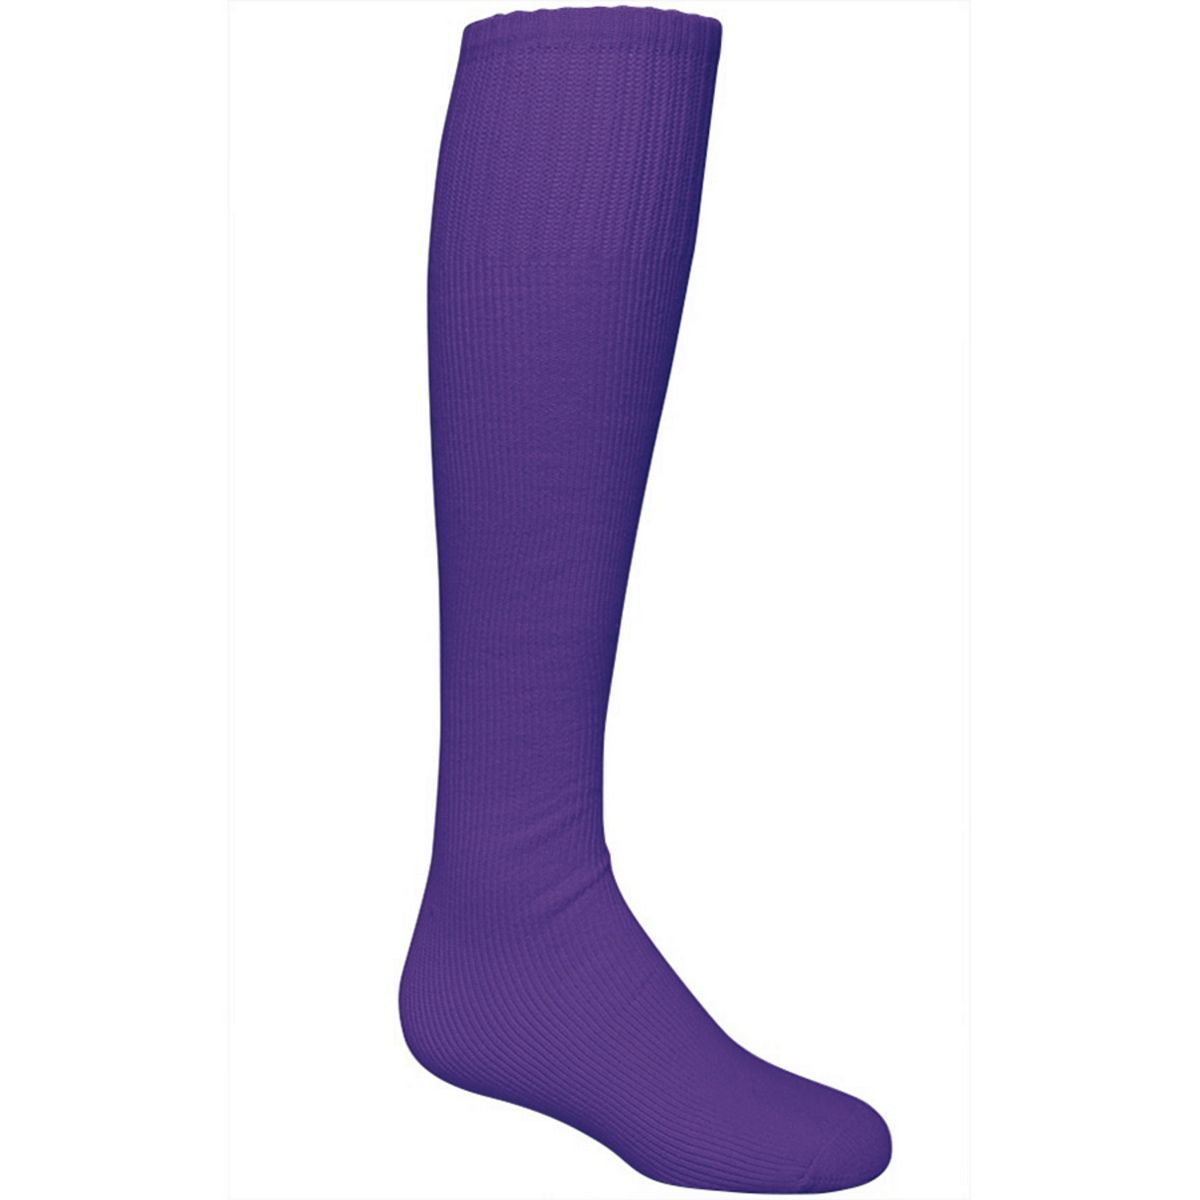 High 5 Athletic  Sock in Purple  -Part of the Accessories, High5-Products, Accessories-Socks product lines at KanaleyCreations.com